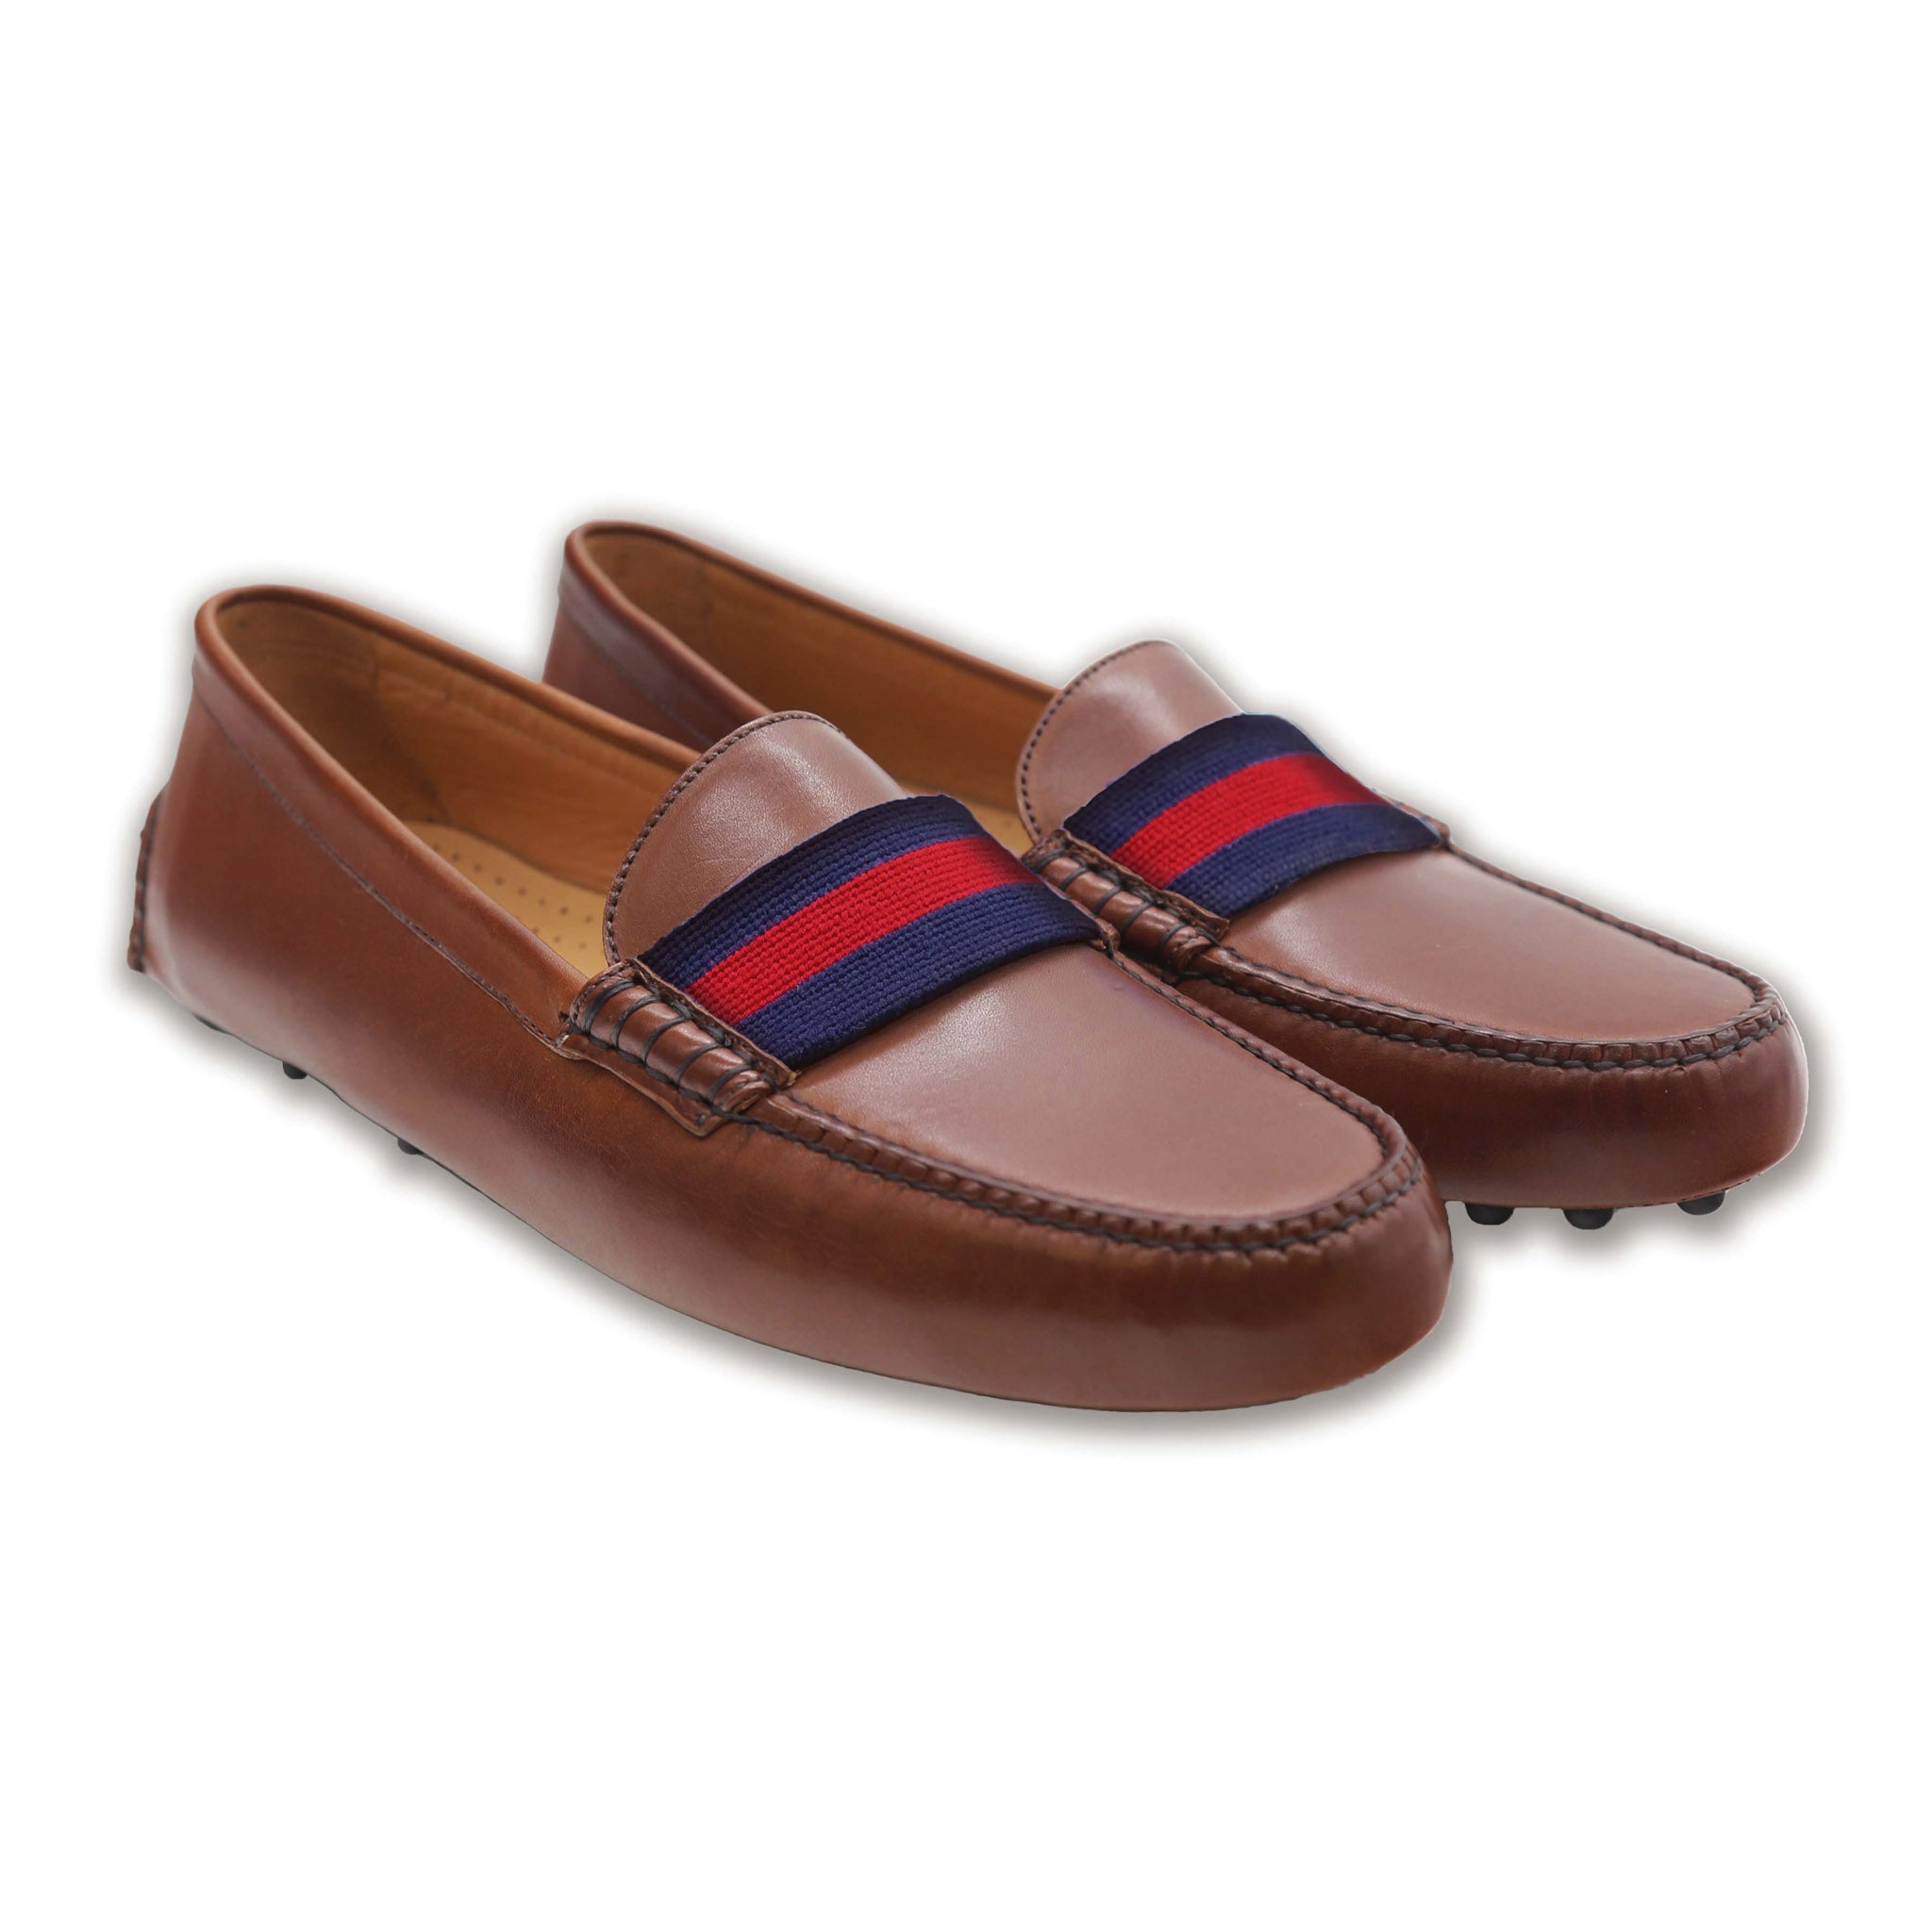 Surcingle Driving Shoes (Dark Navy-Red) (Chestnut Leather)